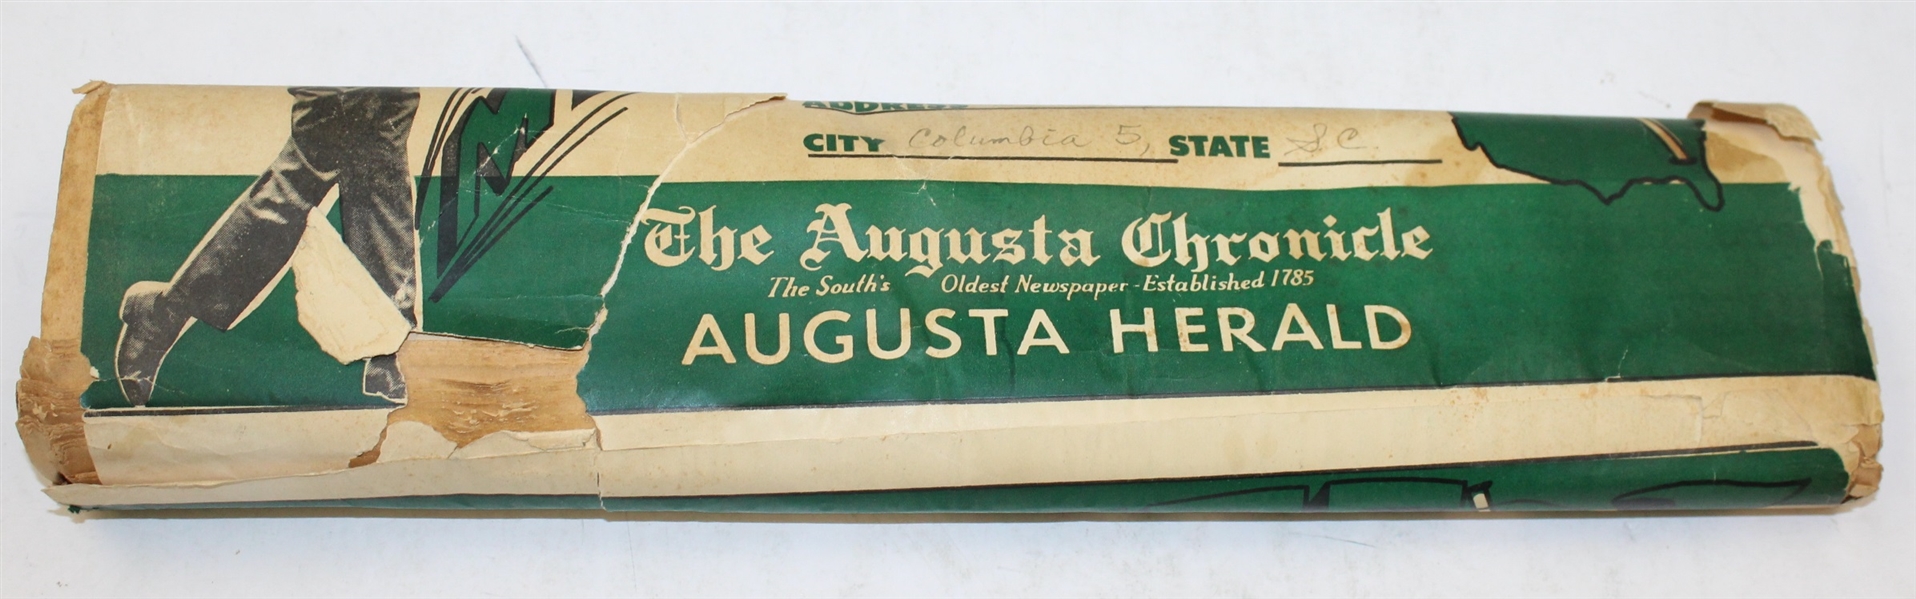 1959 Augusta Chronicle Masters Edition Newspaper- Unopened